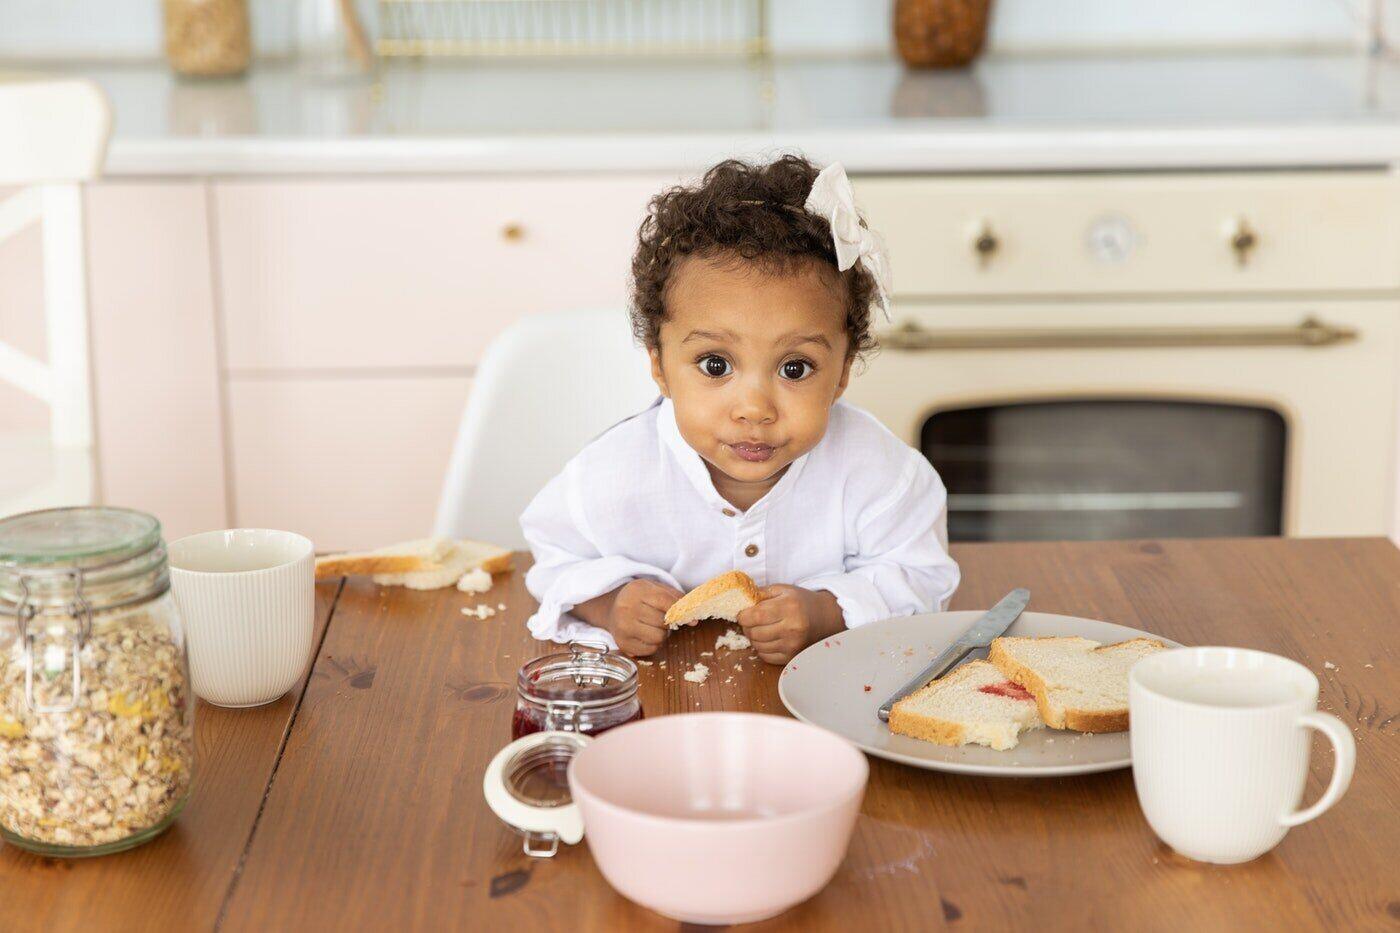 little girl eating bread at table - 7 reasons why wheat straw plates make the best dinnerware